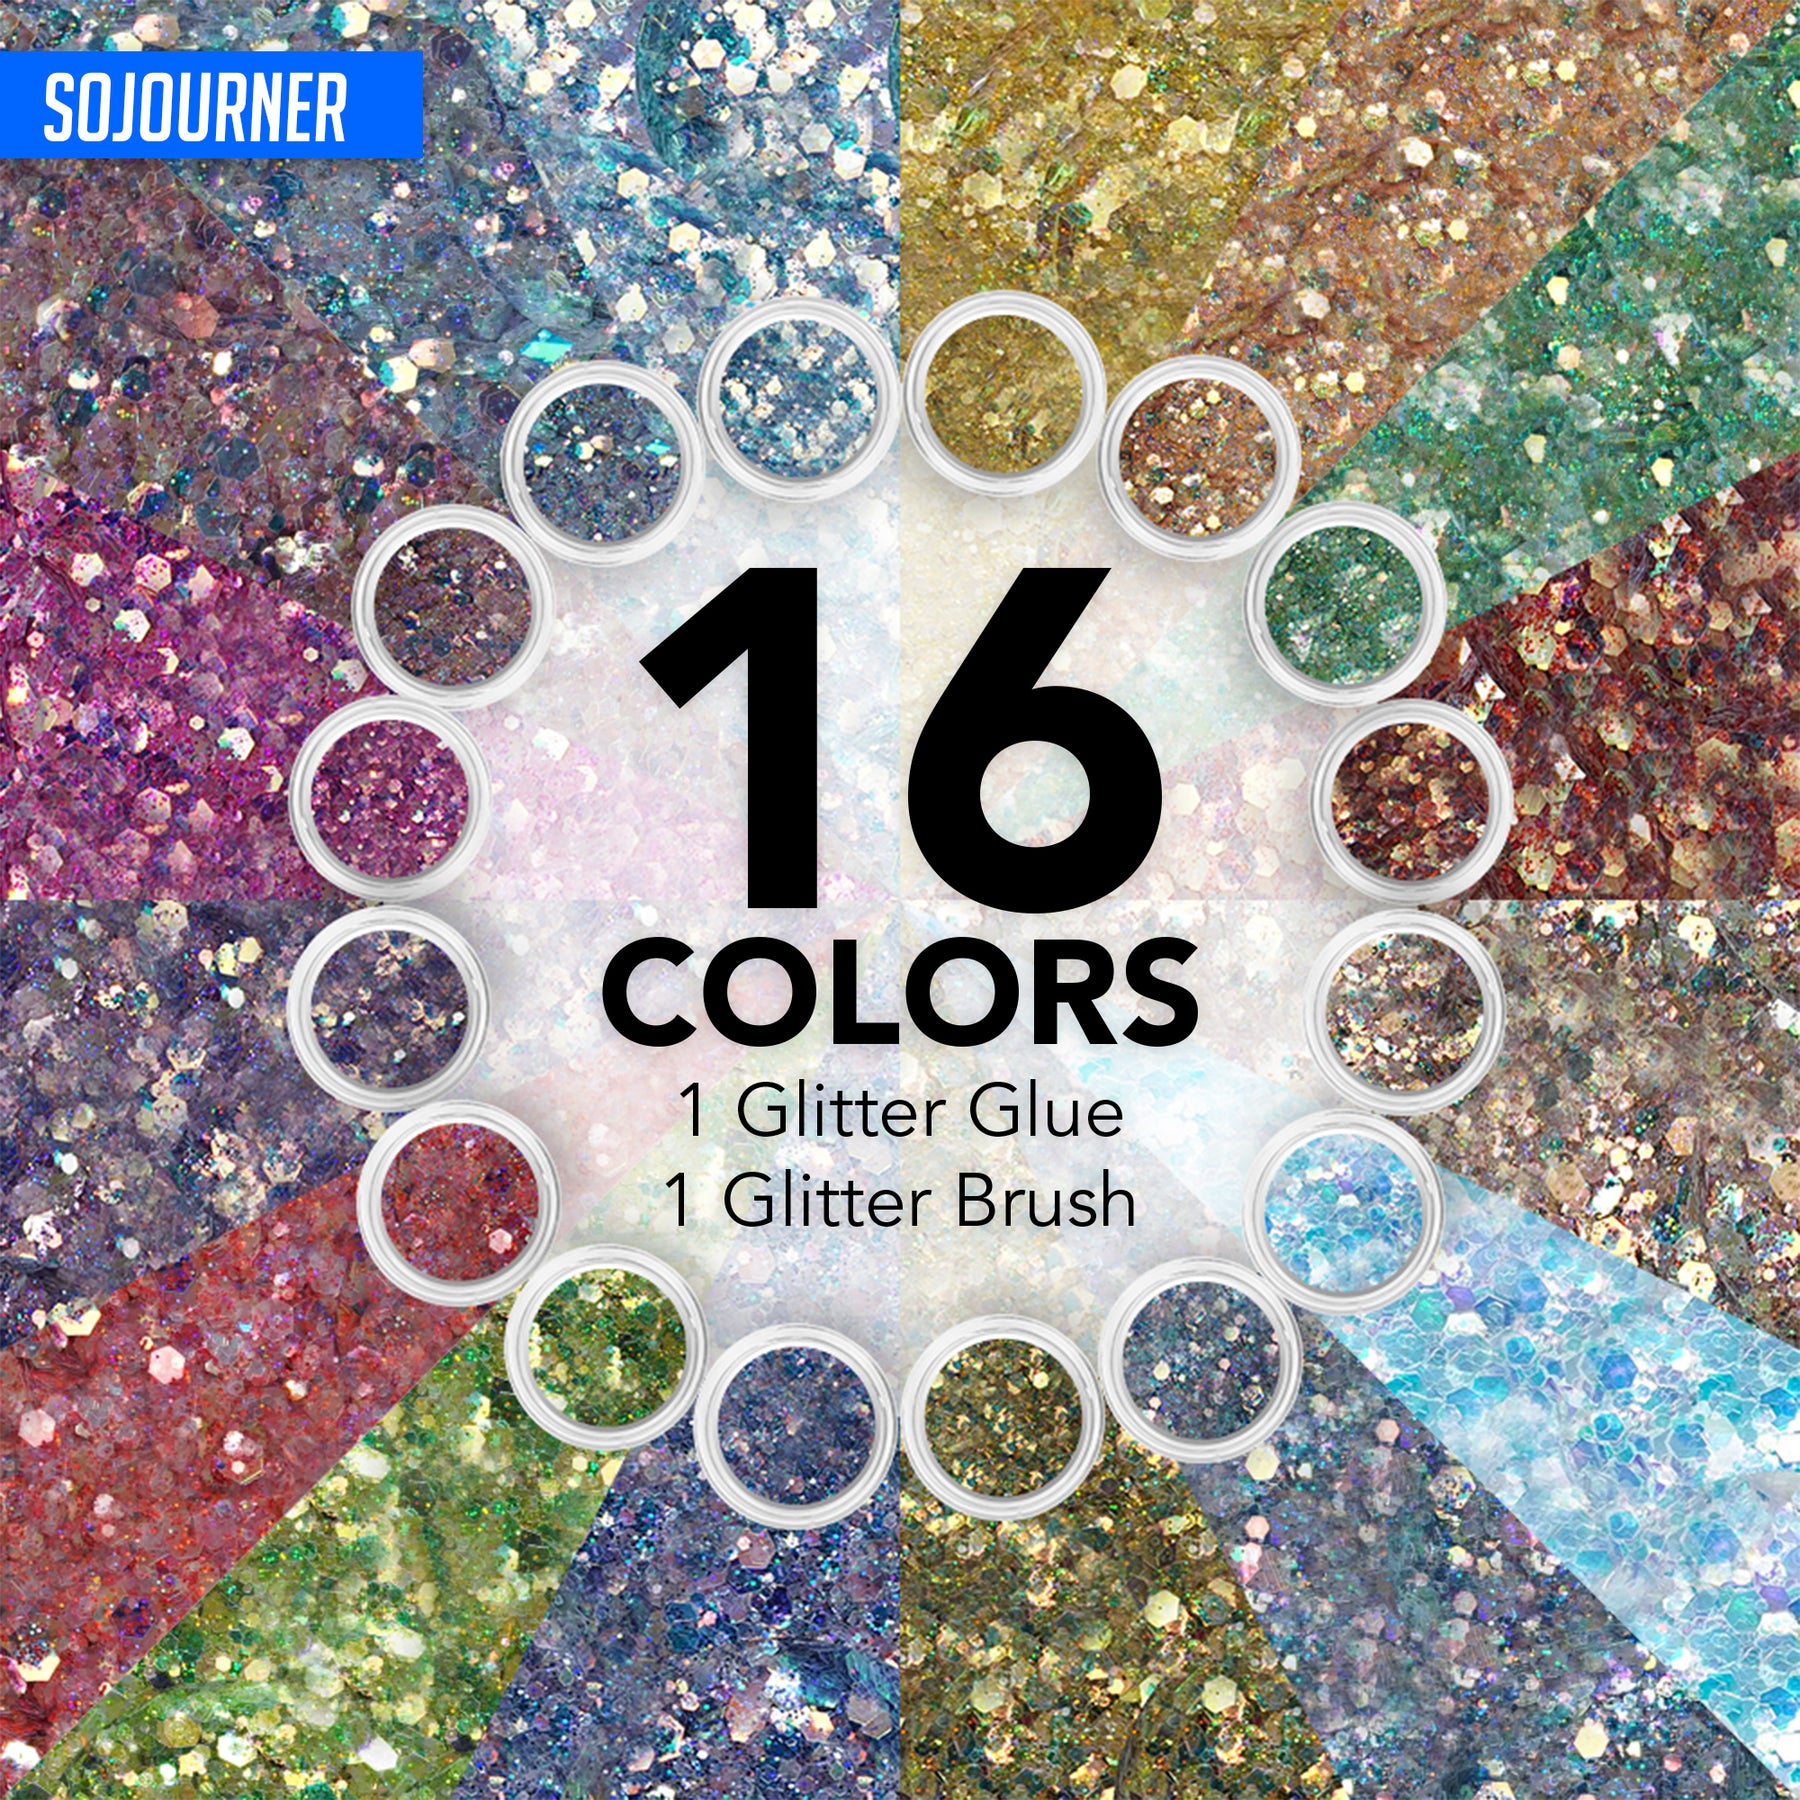 Fairy Tears Chunky Holographic Body Glitter I 16 Colors + Glitter Glue for Face Glitter Makeup, Hair, Eye & Fine Glitter Eyeshadow - Perfect for Halloween, Resin, Tumblers, Craft, Cosmetic & Nail Art